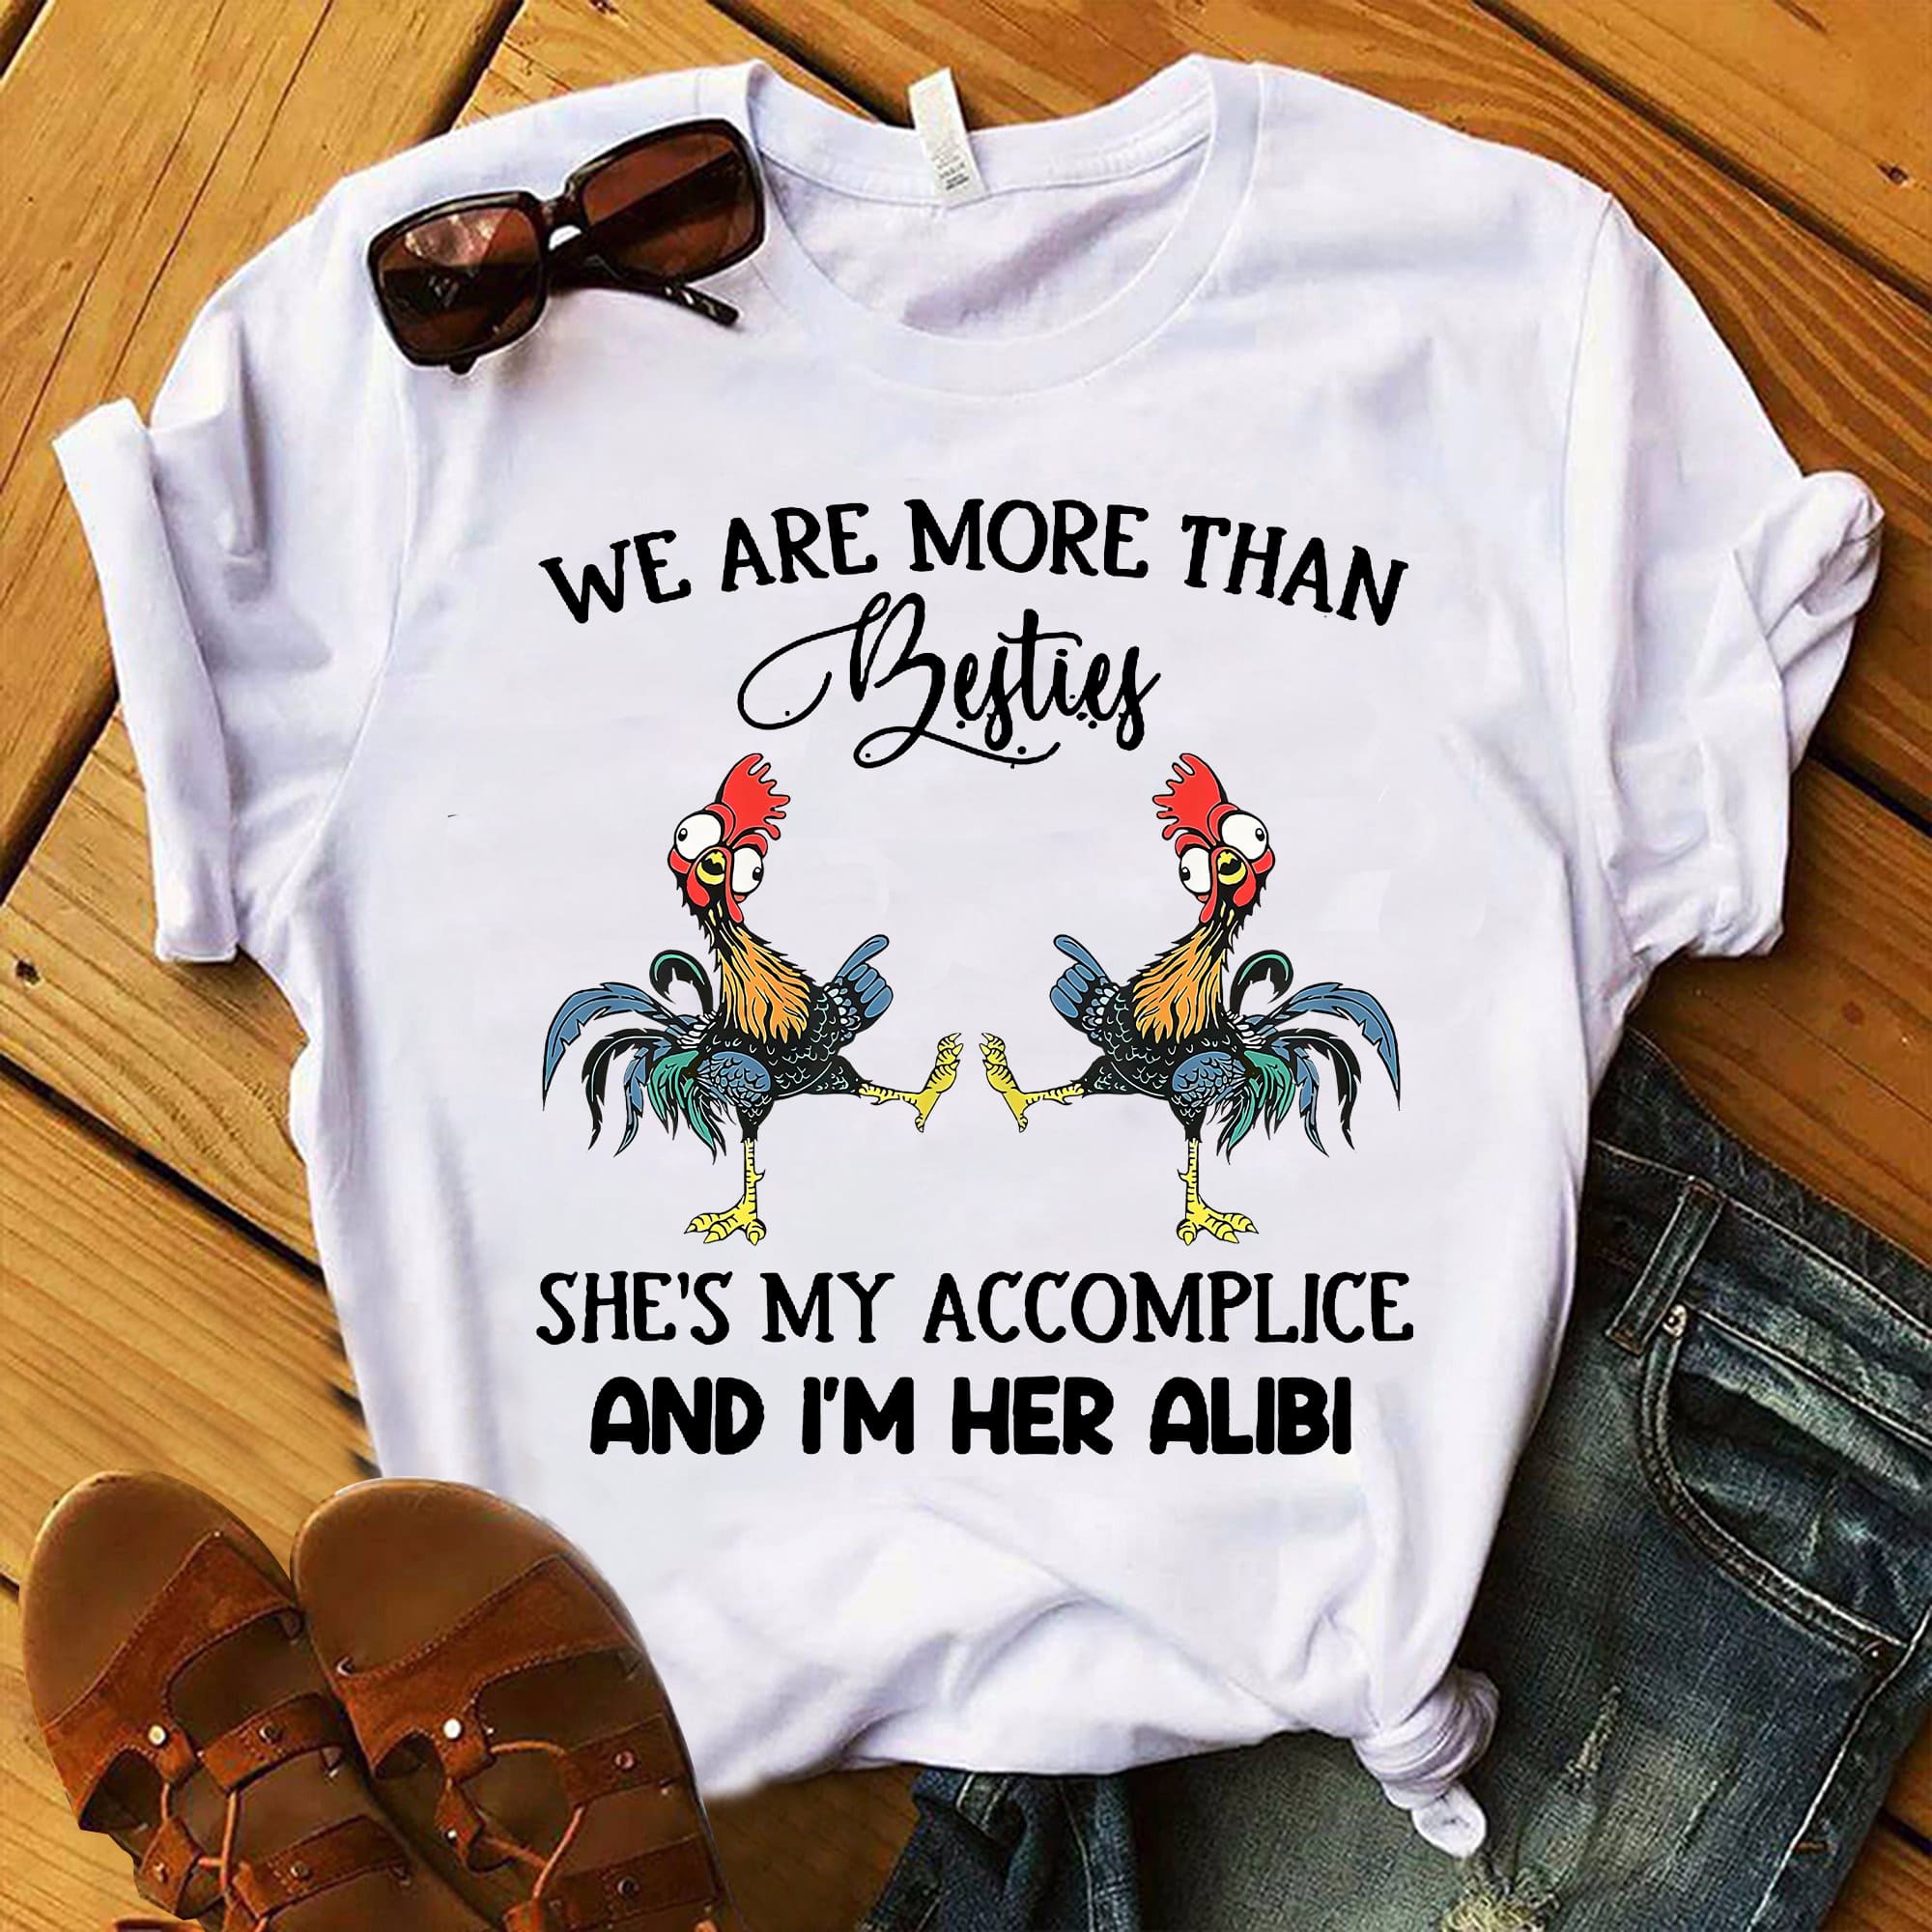 We are more than besties, she's my accomplice and I'm her alibi - Funny crazy chicken, gift for besties